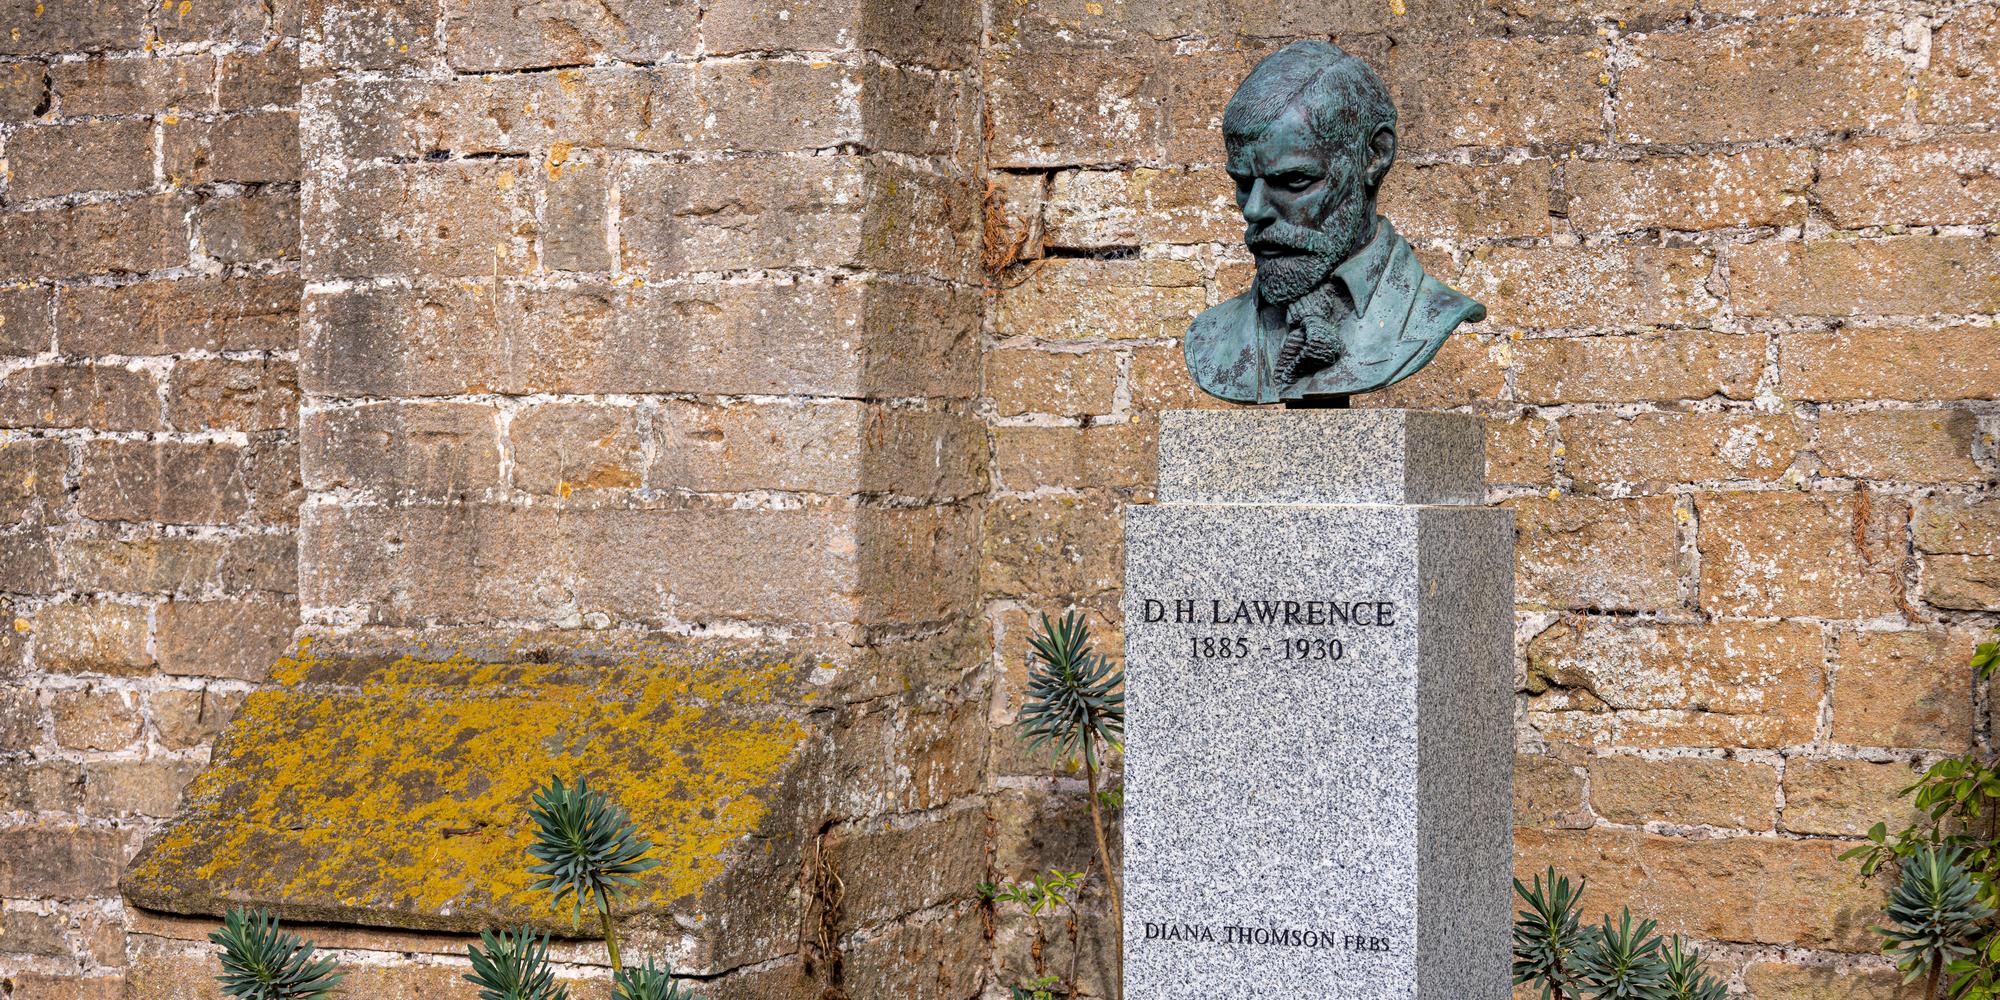 Bust of D.H. Lawrence at Newstead Abbey, Nottinghamshire